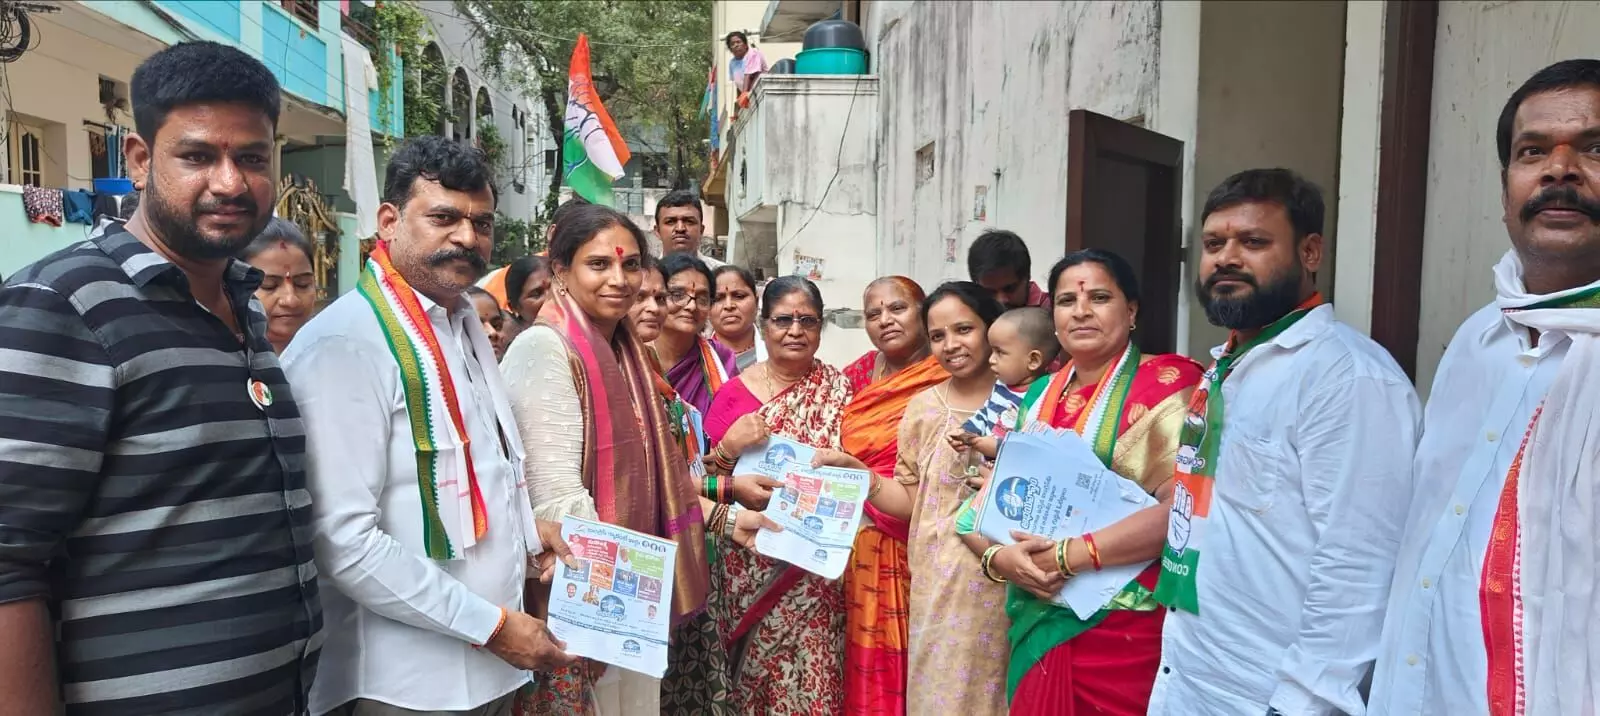 Khairatabad Congress candidate campaigns Chintal Basti, says she came to serve people